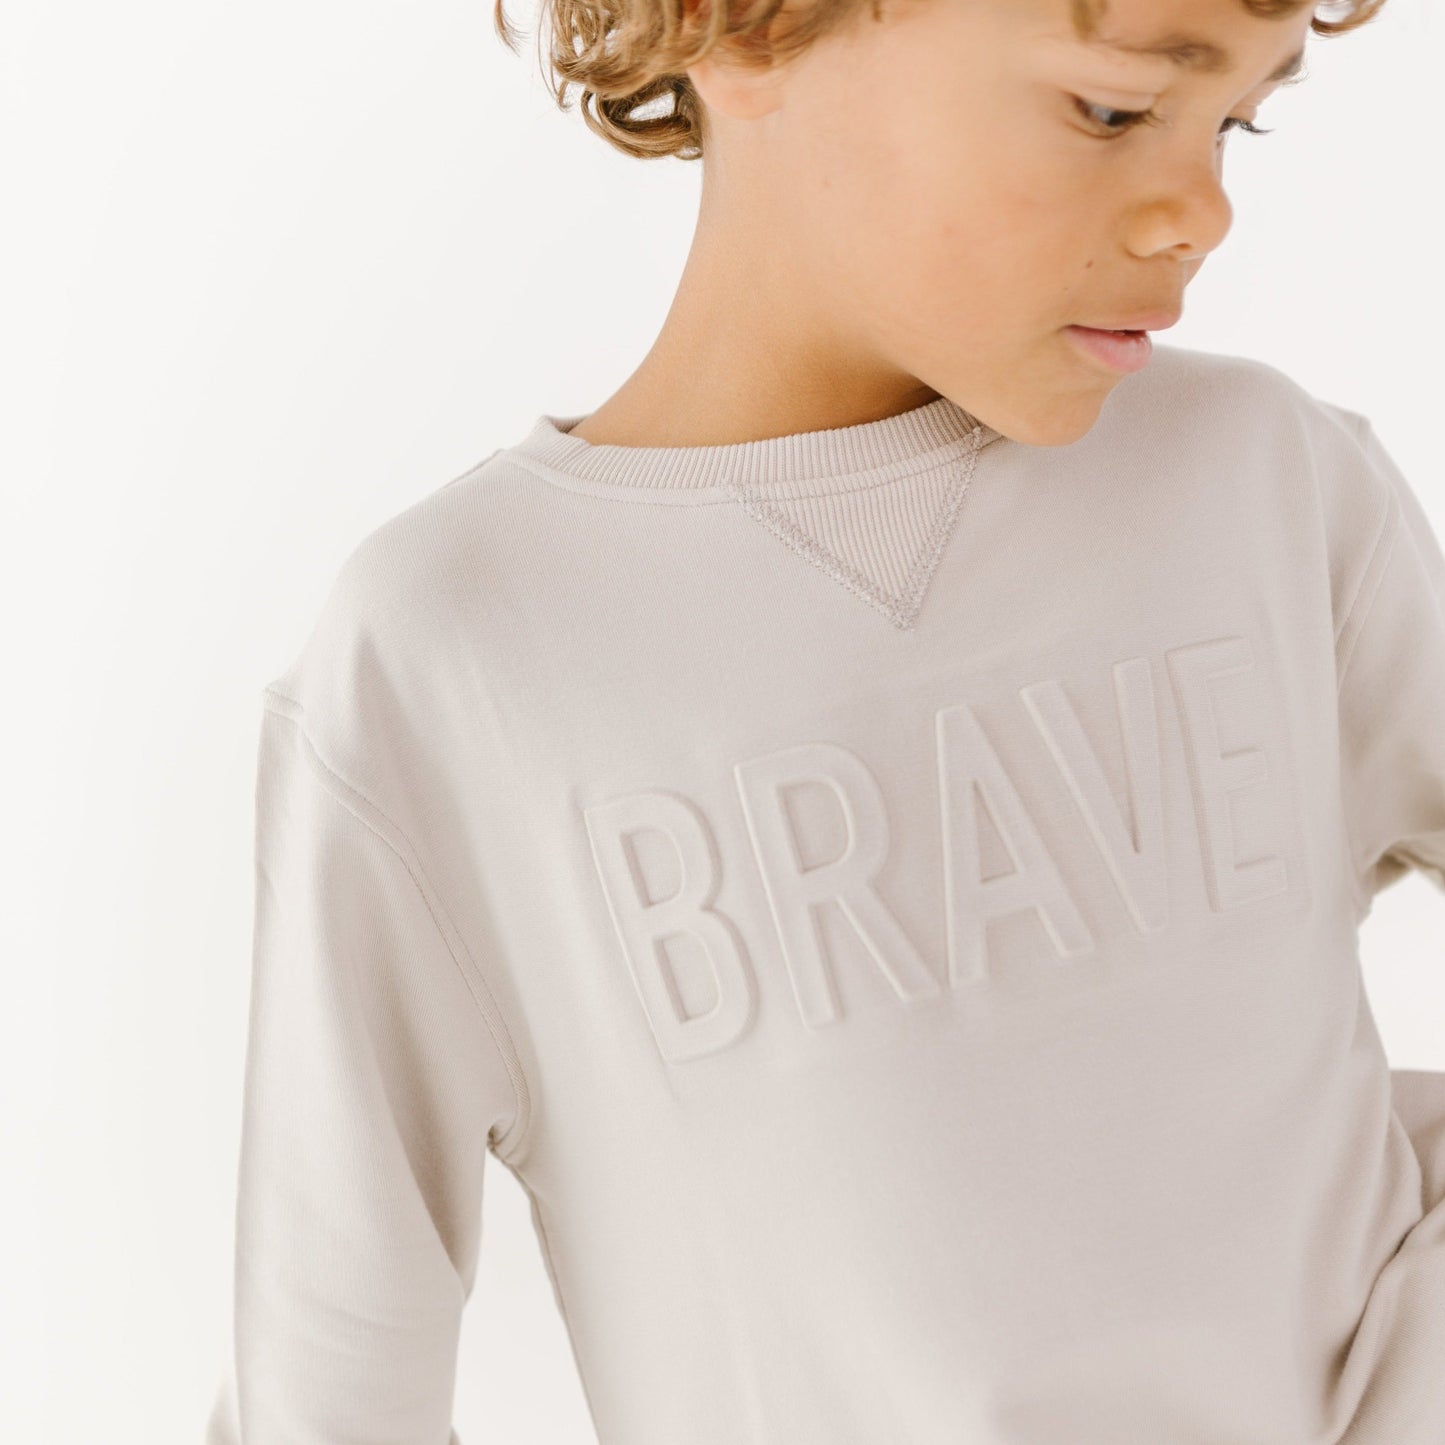 Taupe with Embossed Brave French Terry Pullover